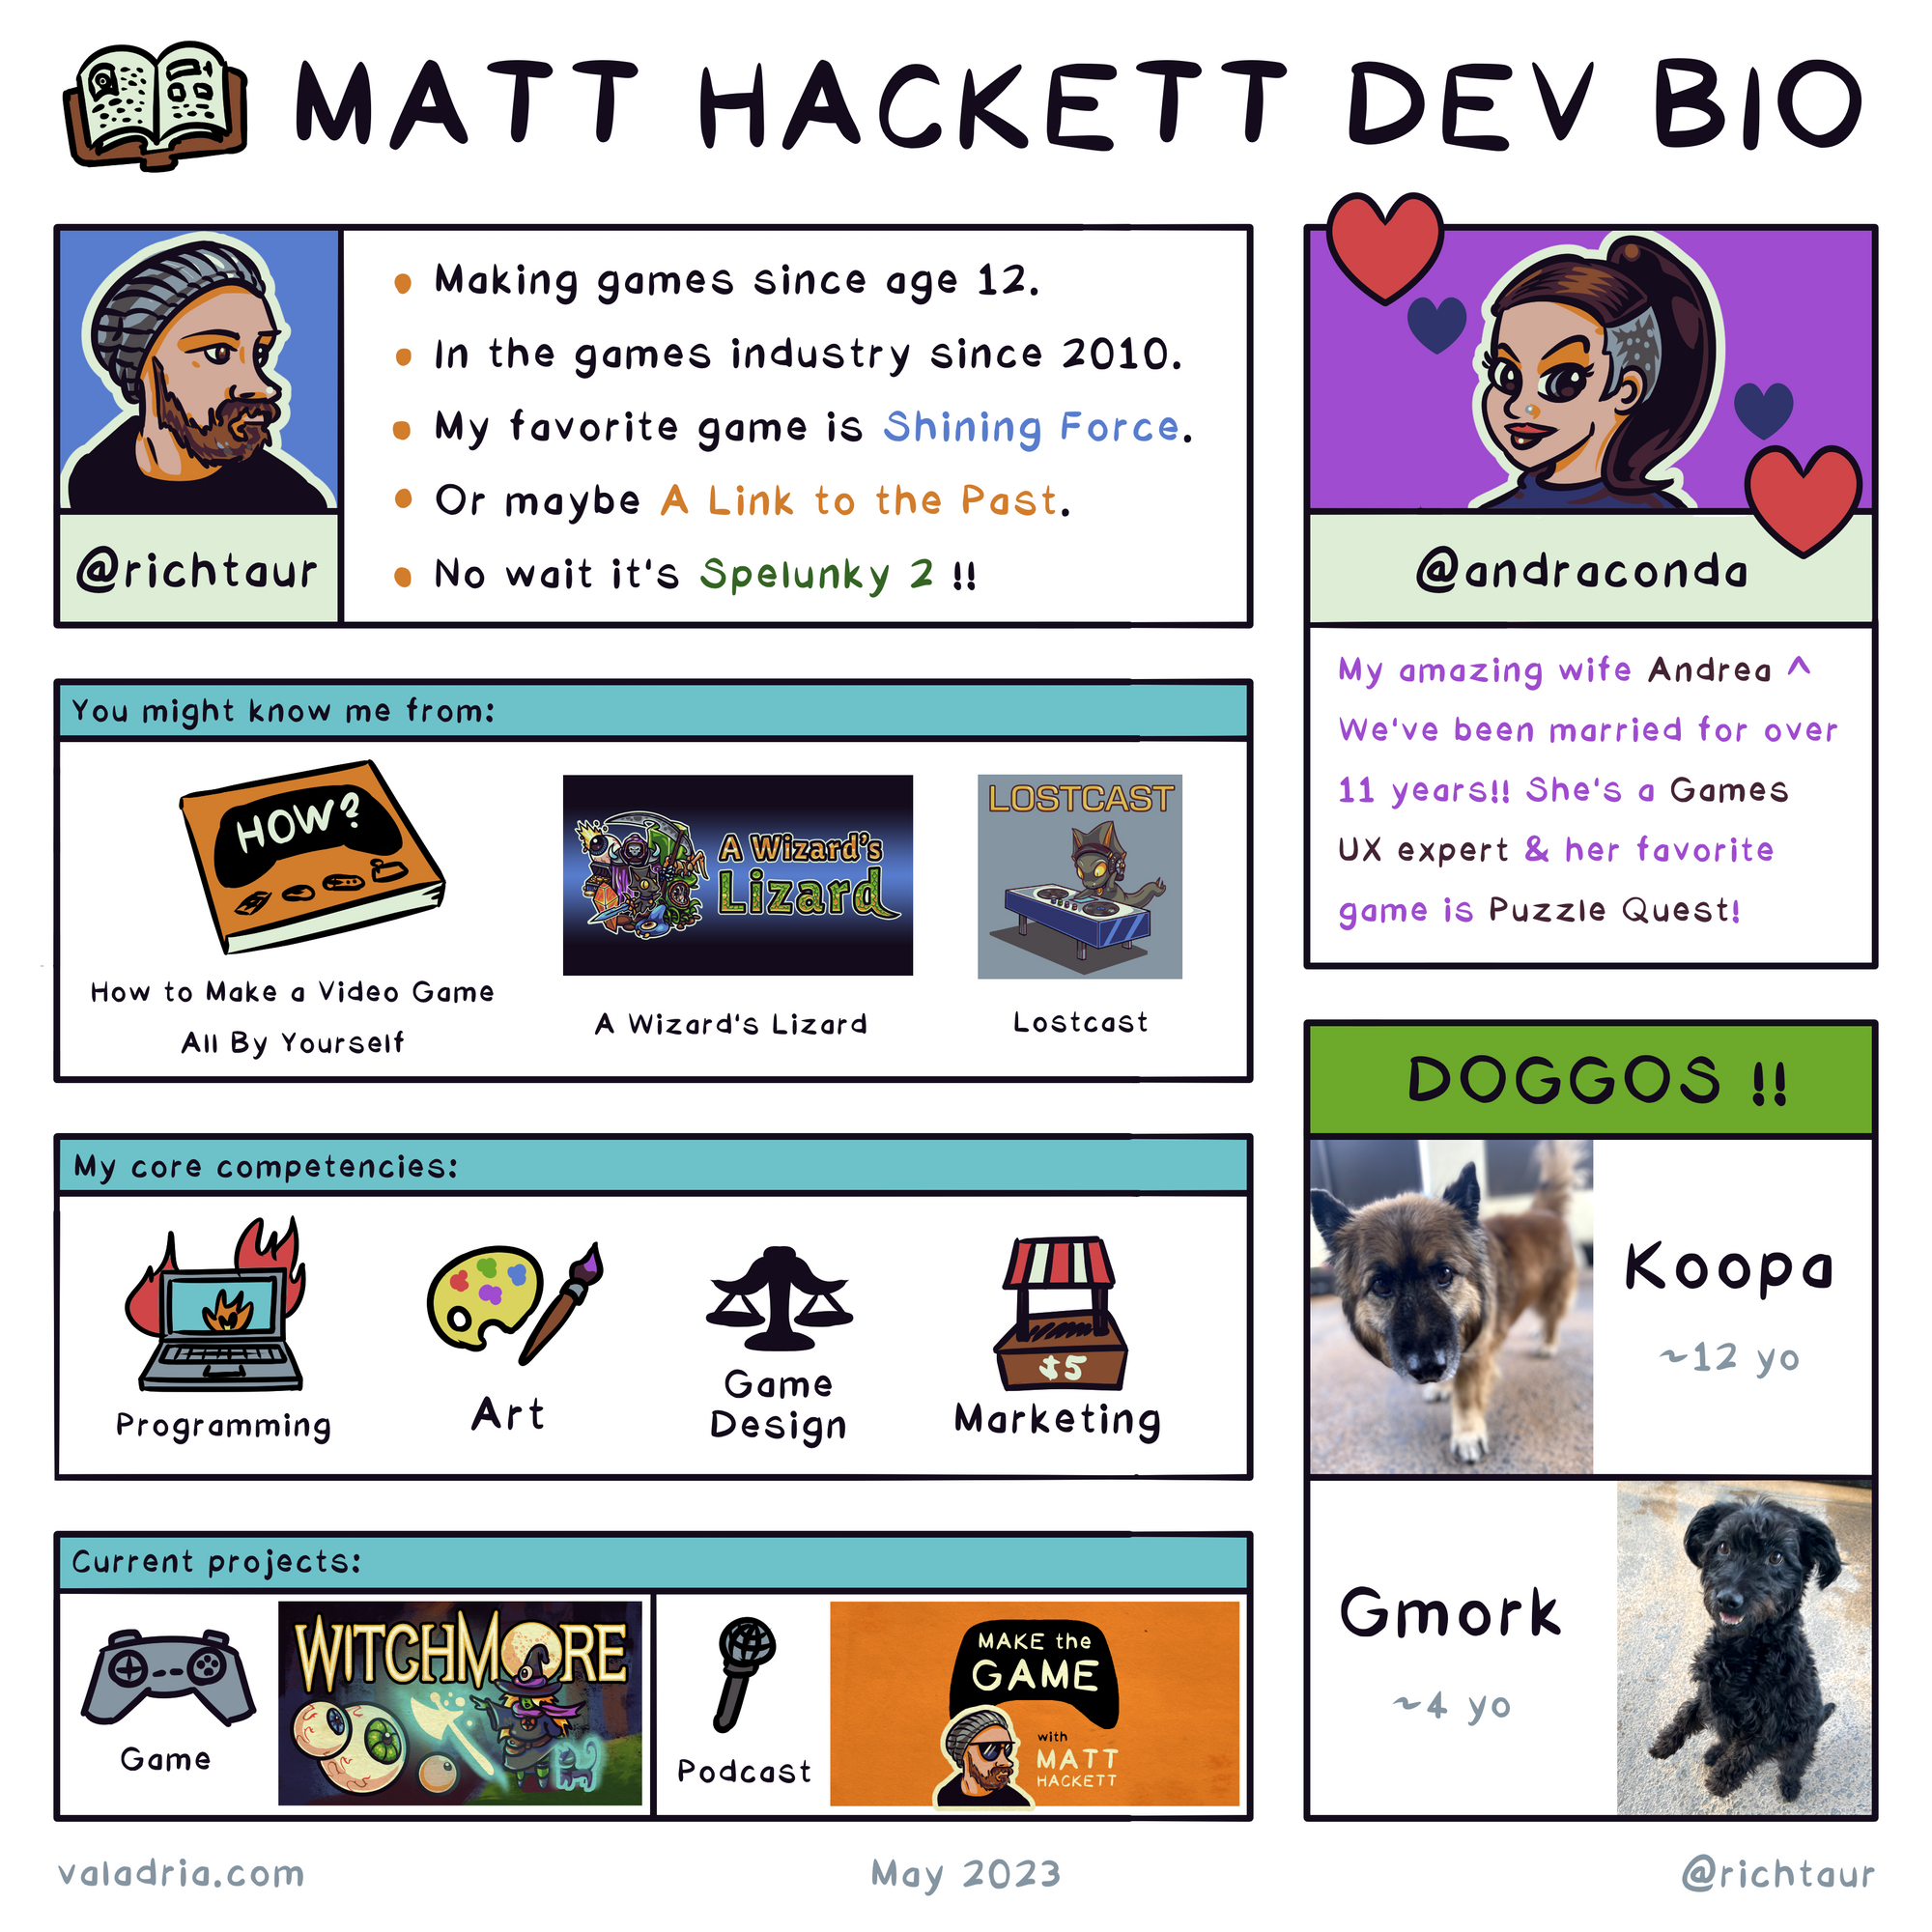 MATT HACKETT DEV BIO @richtaur Making games since age 12, In the games industry since 2010. My favorite game is Shining Force, or maybe A Link to the Past, no wait it's Spelunky 2!! @andraconda My amazing wife Andrea We've been married for over 11 years!! She's a Games UX expert & her favorite game is Puzzle Quest! You might know me from: How to Make a Video Game All By Yourself A Wizard's Lizard Lostcast My core competencies: Programming Art Game Design Marketing Current projects: Game: WITCHMORE Podcast: Make the Game DOGGOS!! Koopa ~12 yo Gmork ~4 yo May 2023 valadria.com